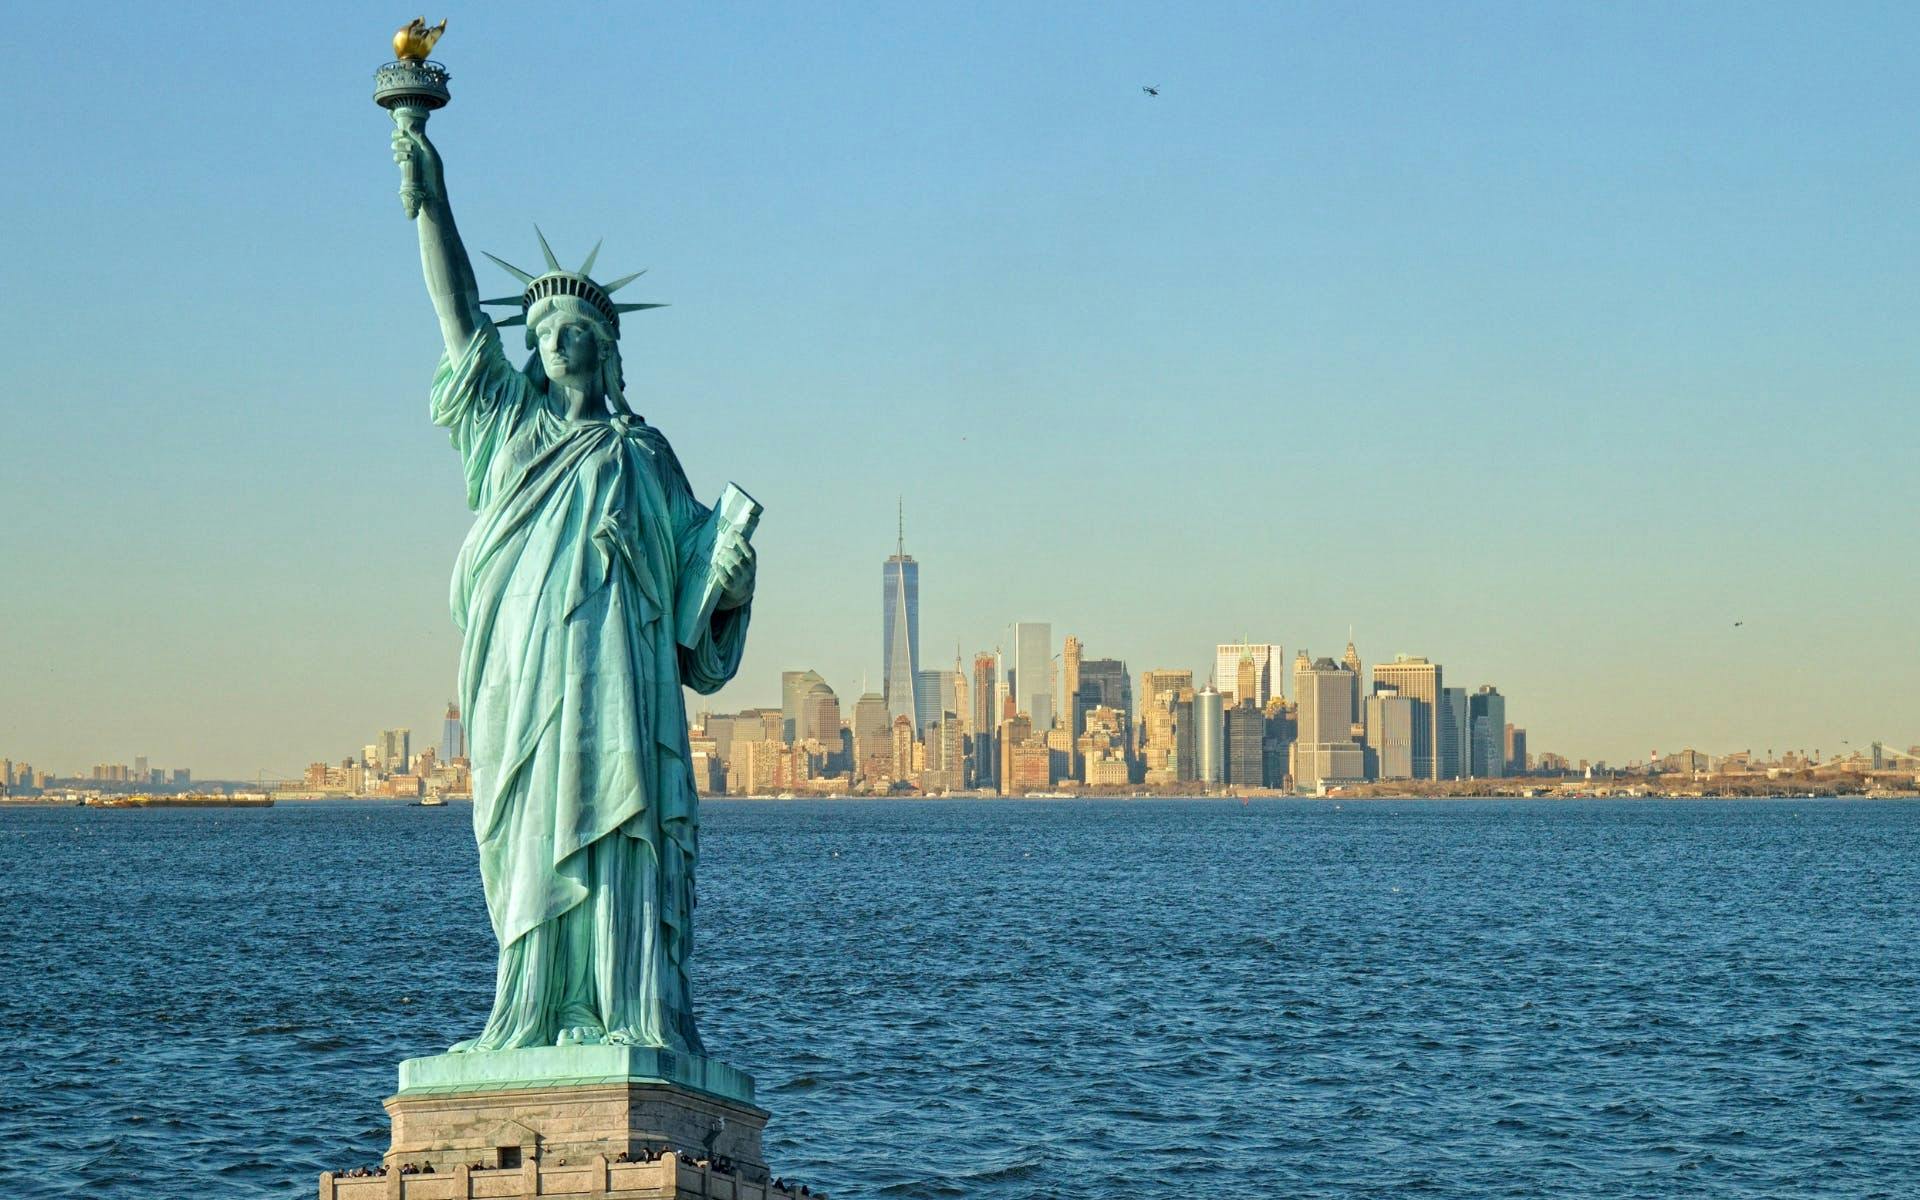 Statue of Liberty Tickets and Tours in New York musement